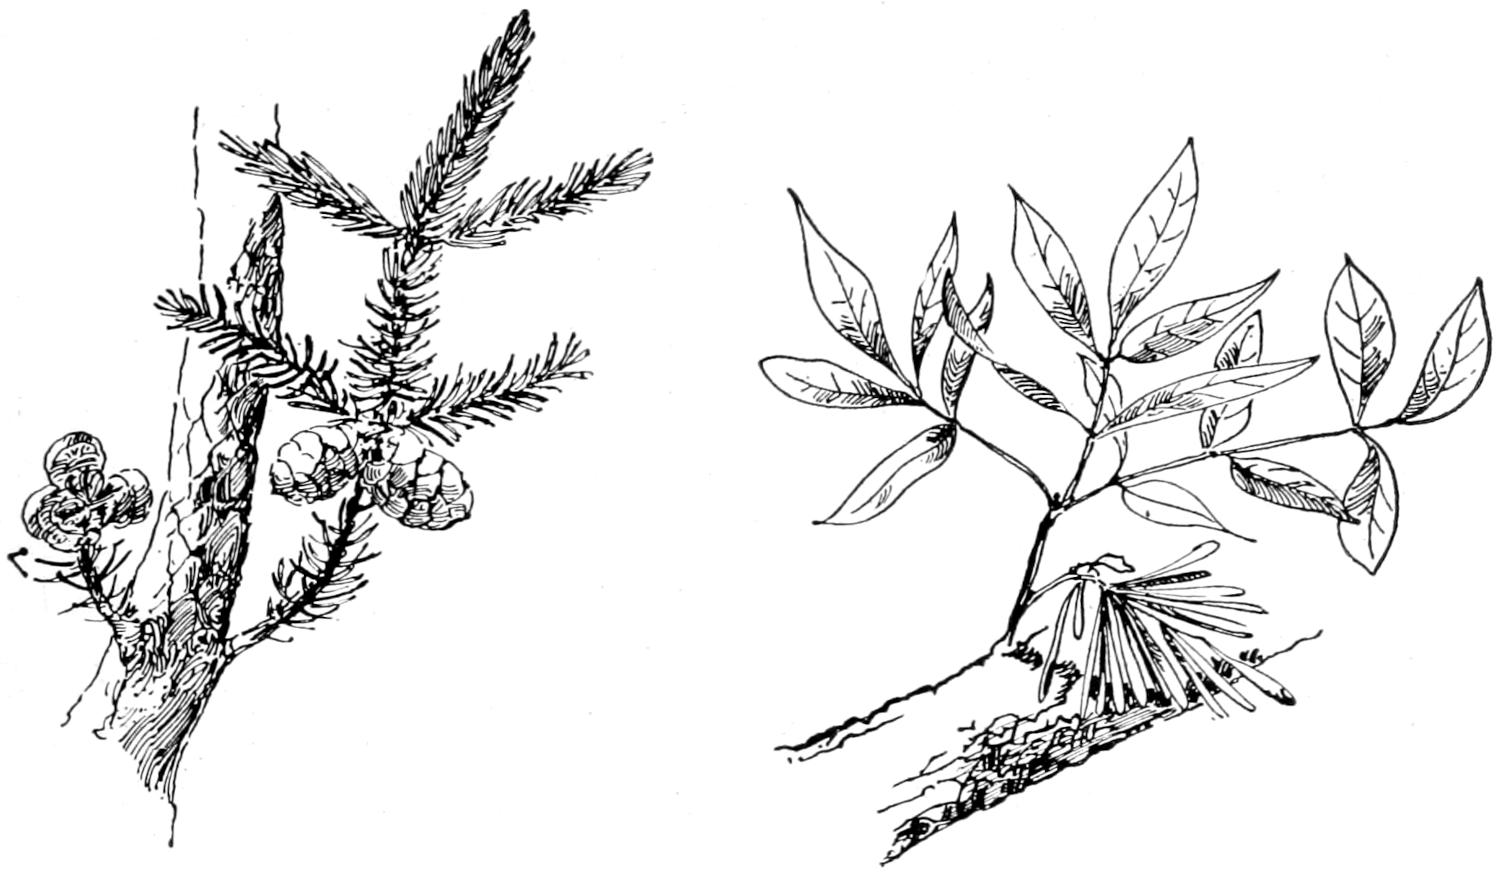 Spruce twig, needles and cones; ash twig, leaves and fruits